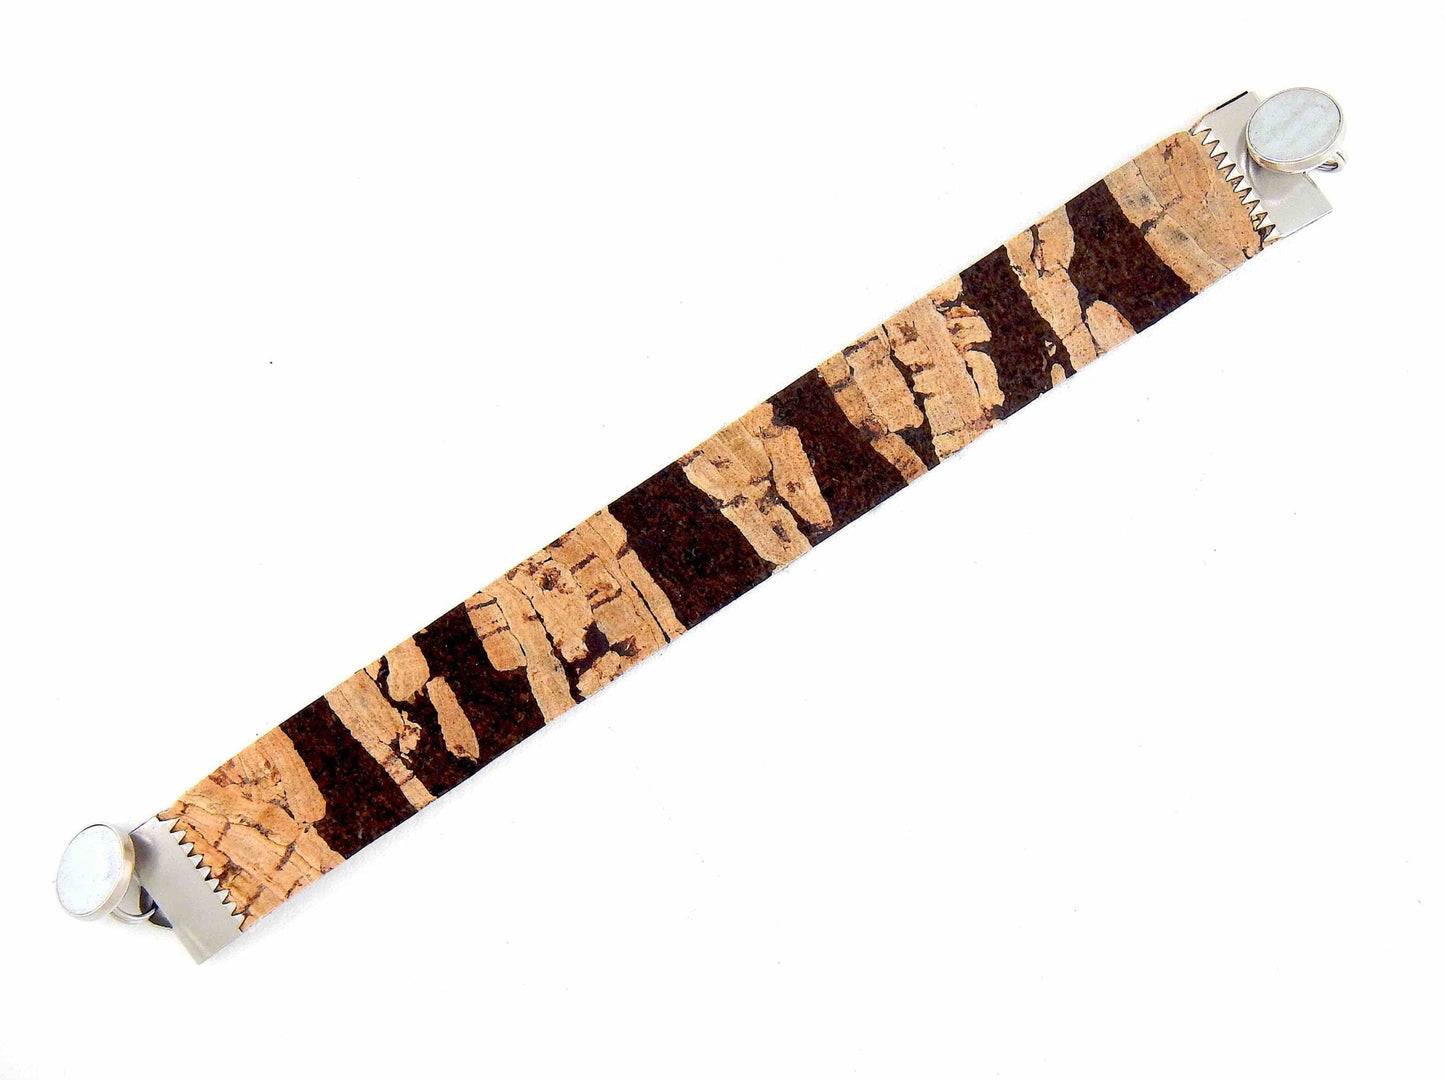 Simple 15mm flat cork bracelet with magnetic stainless steel clasp in 6 colours (brown tiling, brown zebra, natural, sky blue, emerald green, red and gold speckles)